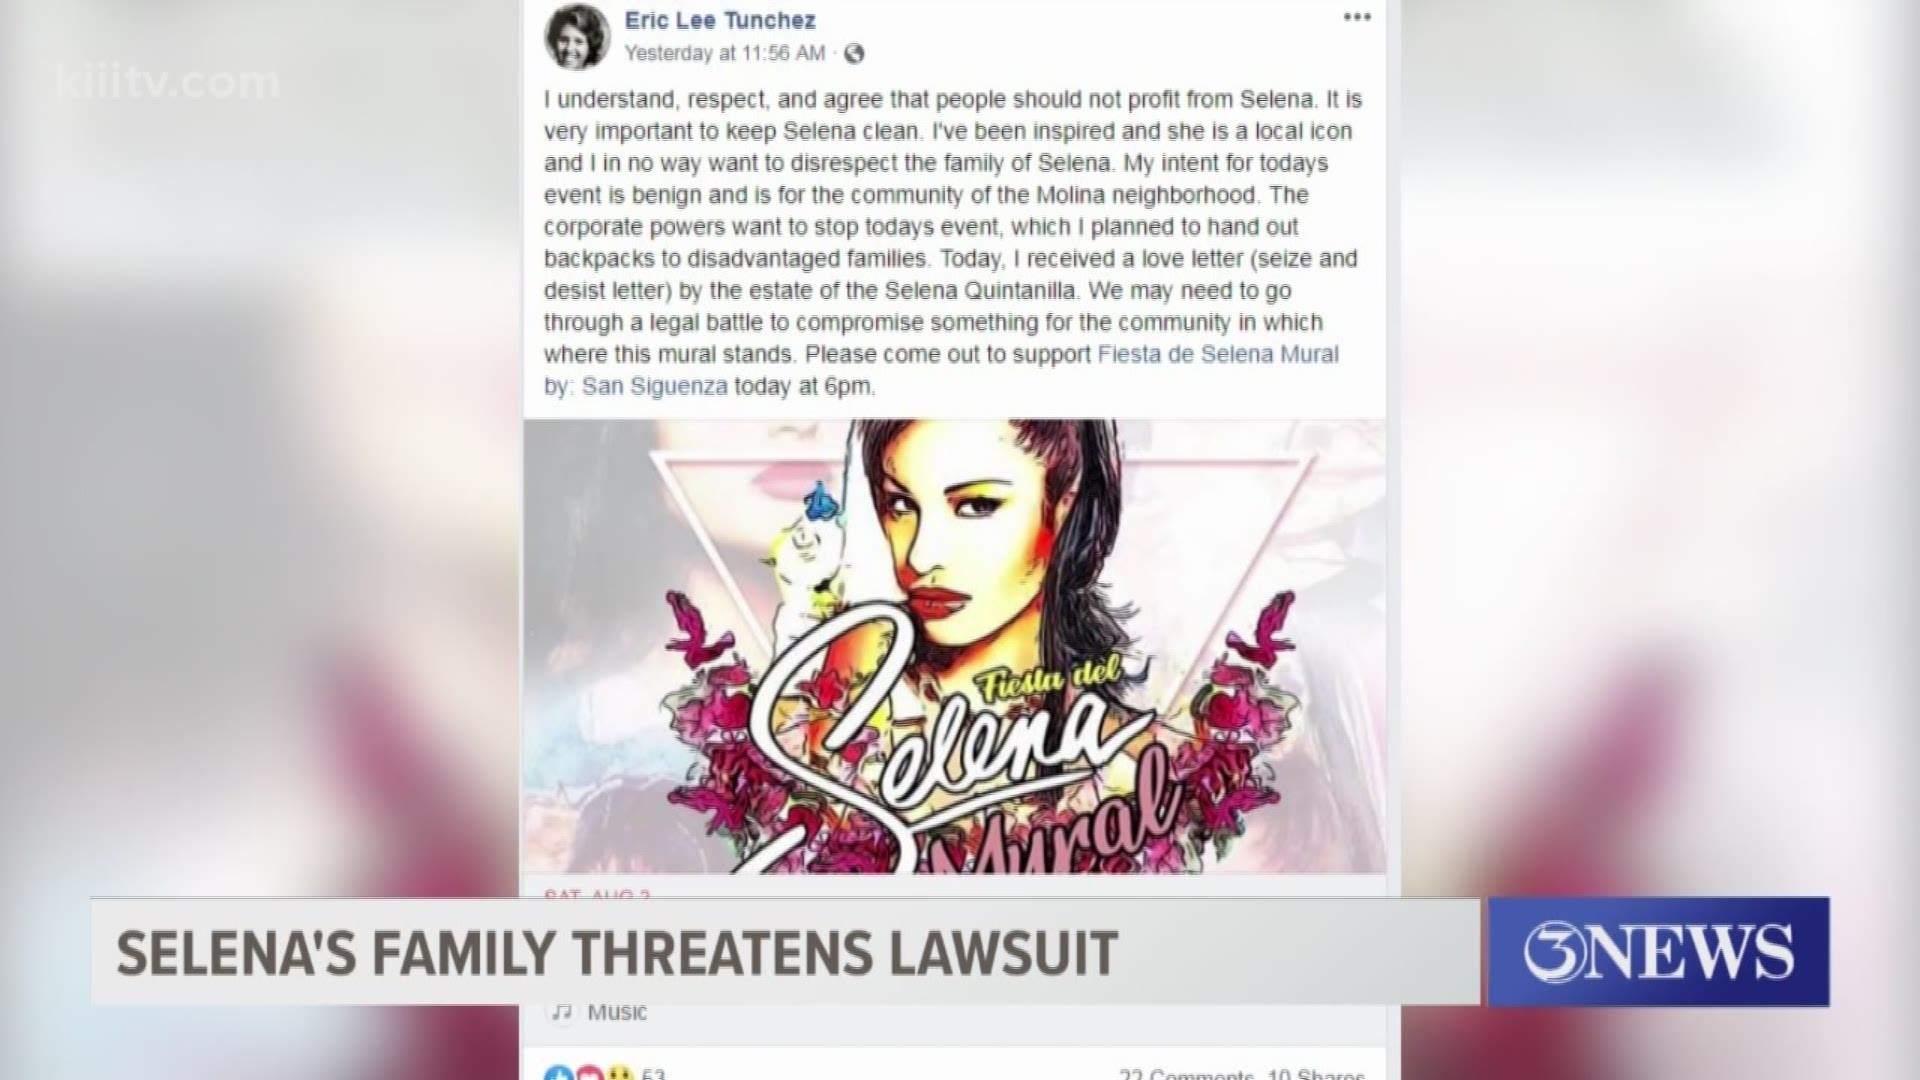 Just hours before a party was held to celebrate the new Selena mural in the Molina neighborhood, the Tejano Queens' family threatened to file a lawsuit against the event organizer, Eric Tunchez.